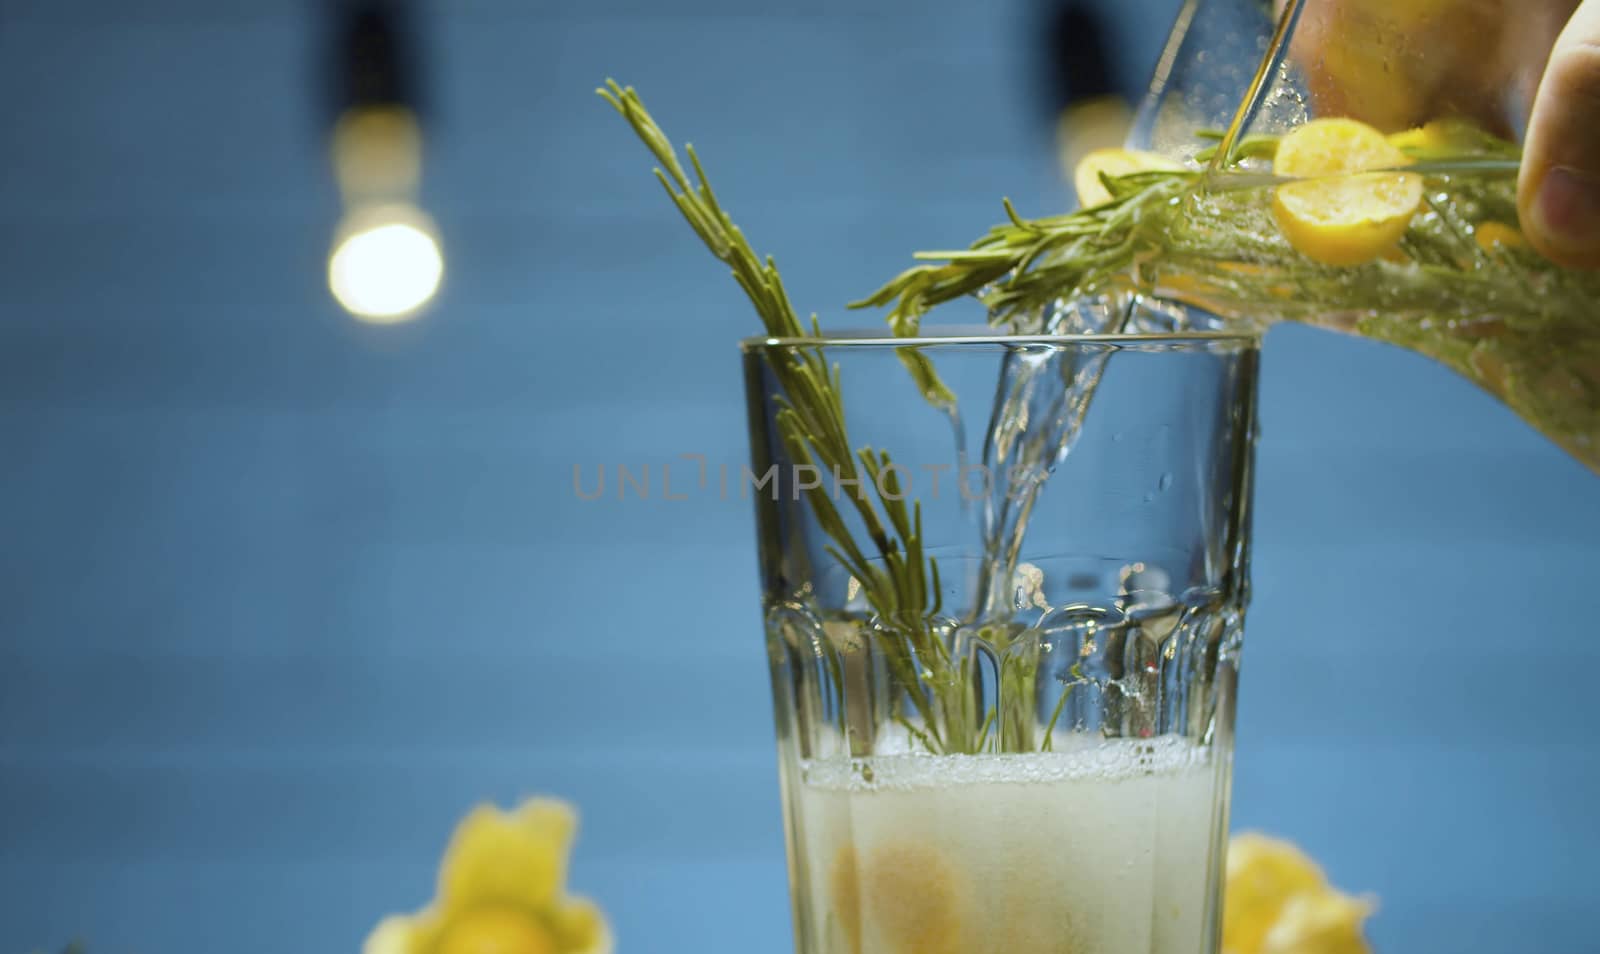 Rosemary and physalis lemonade by Alize